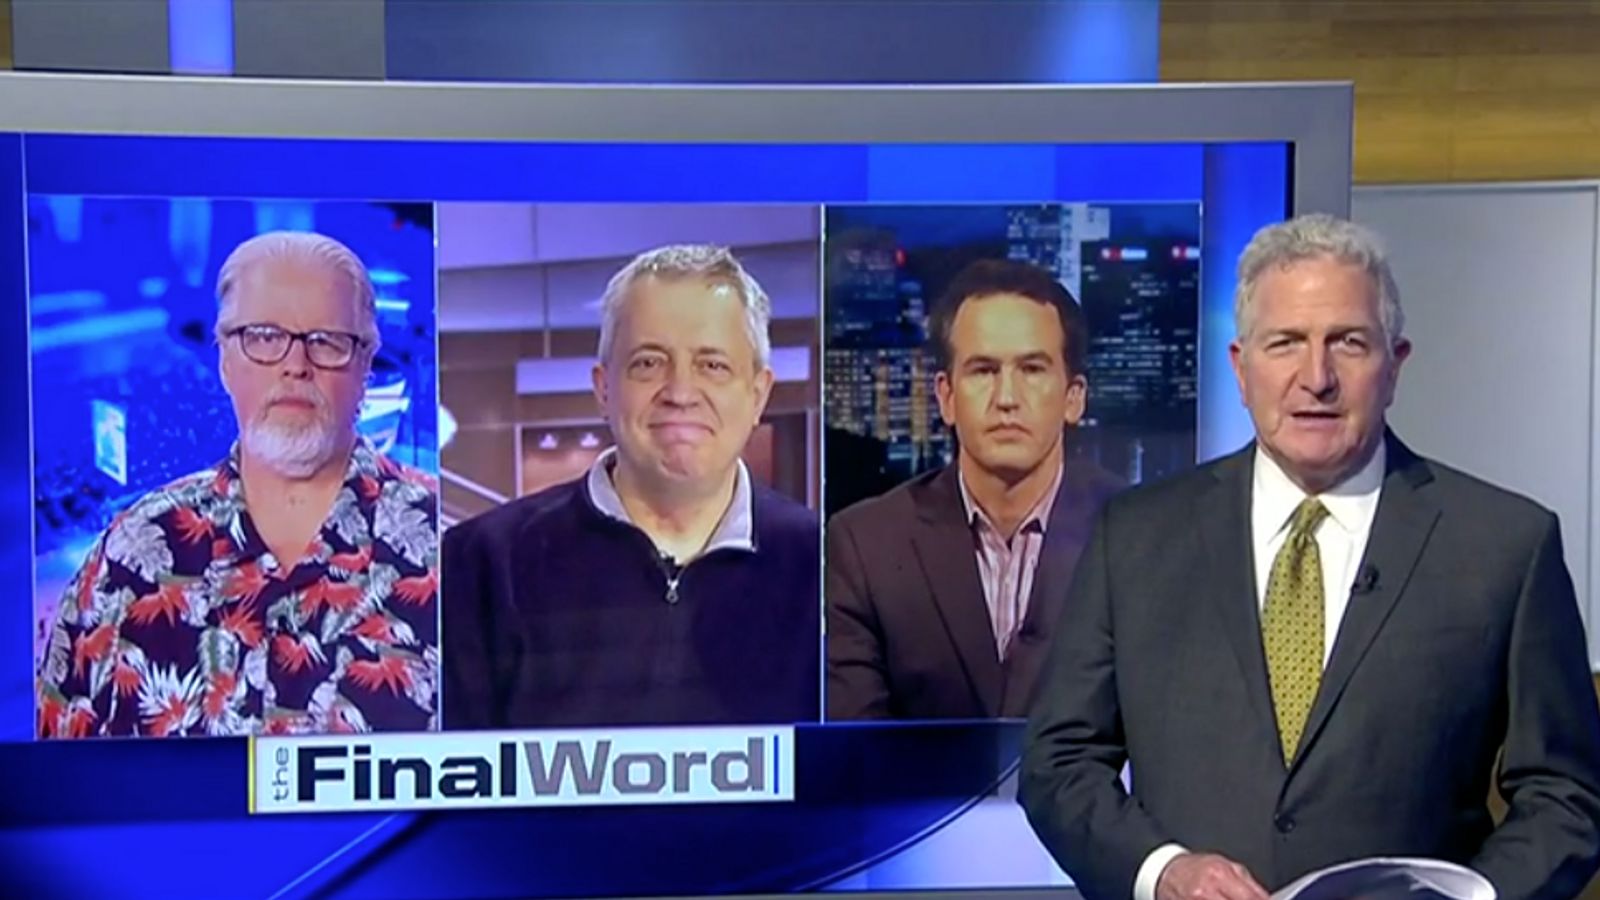 TV: DK on WPXI's 'Final Word' with Mark Madden, Tim Benz, and Alby